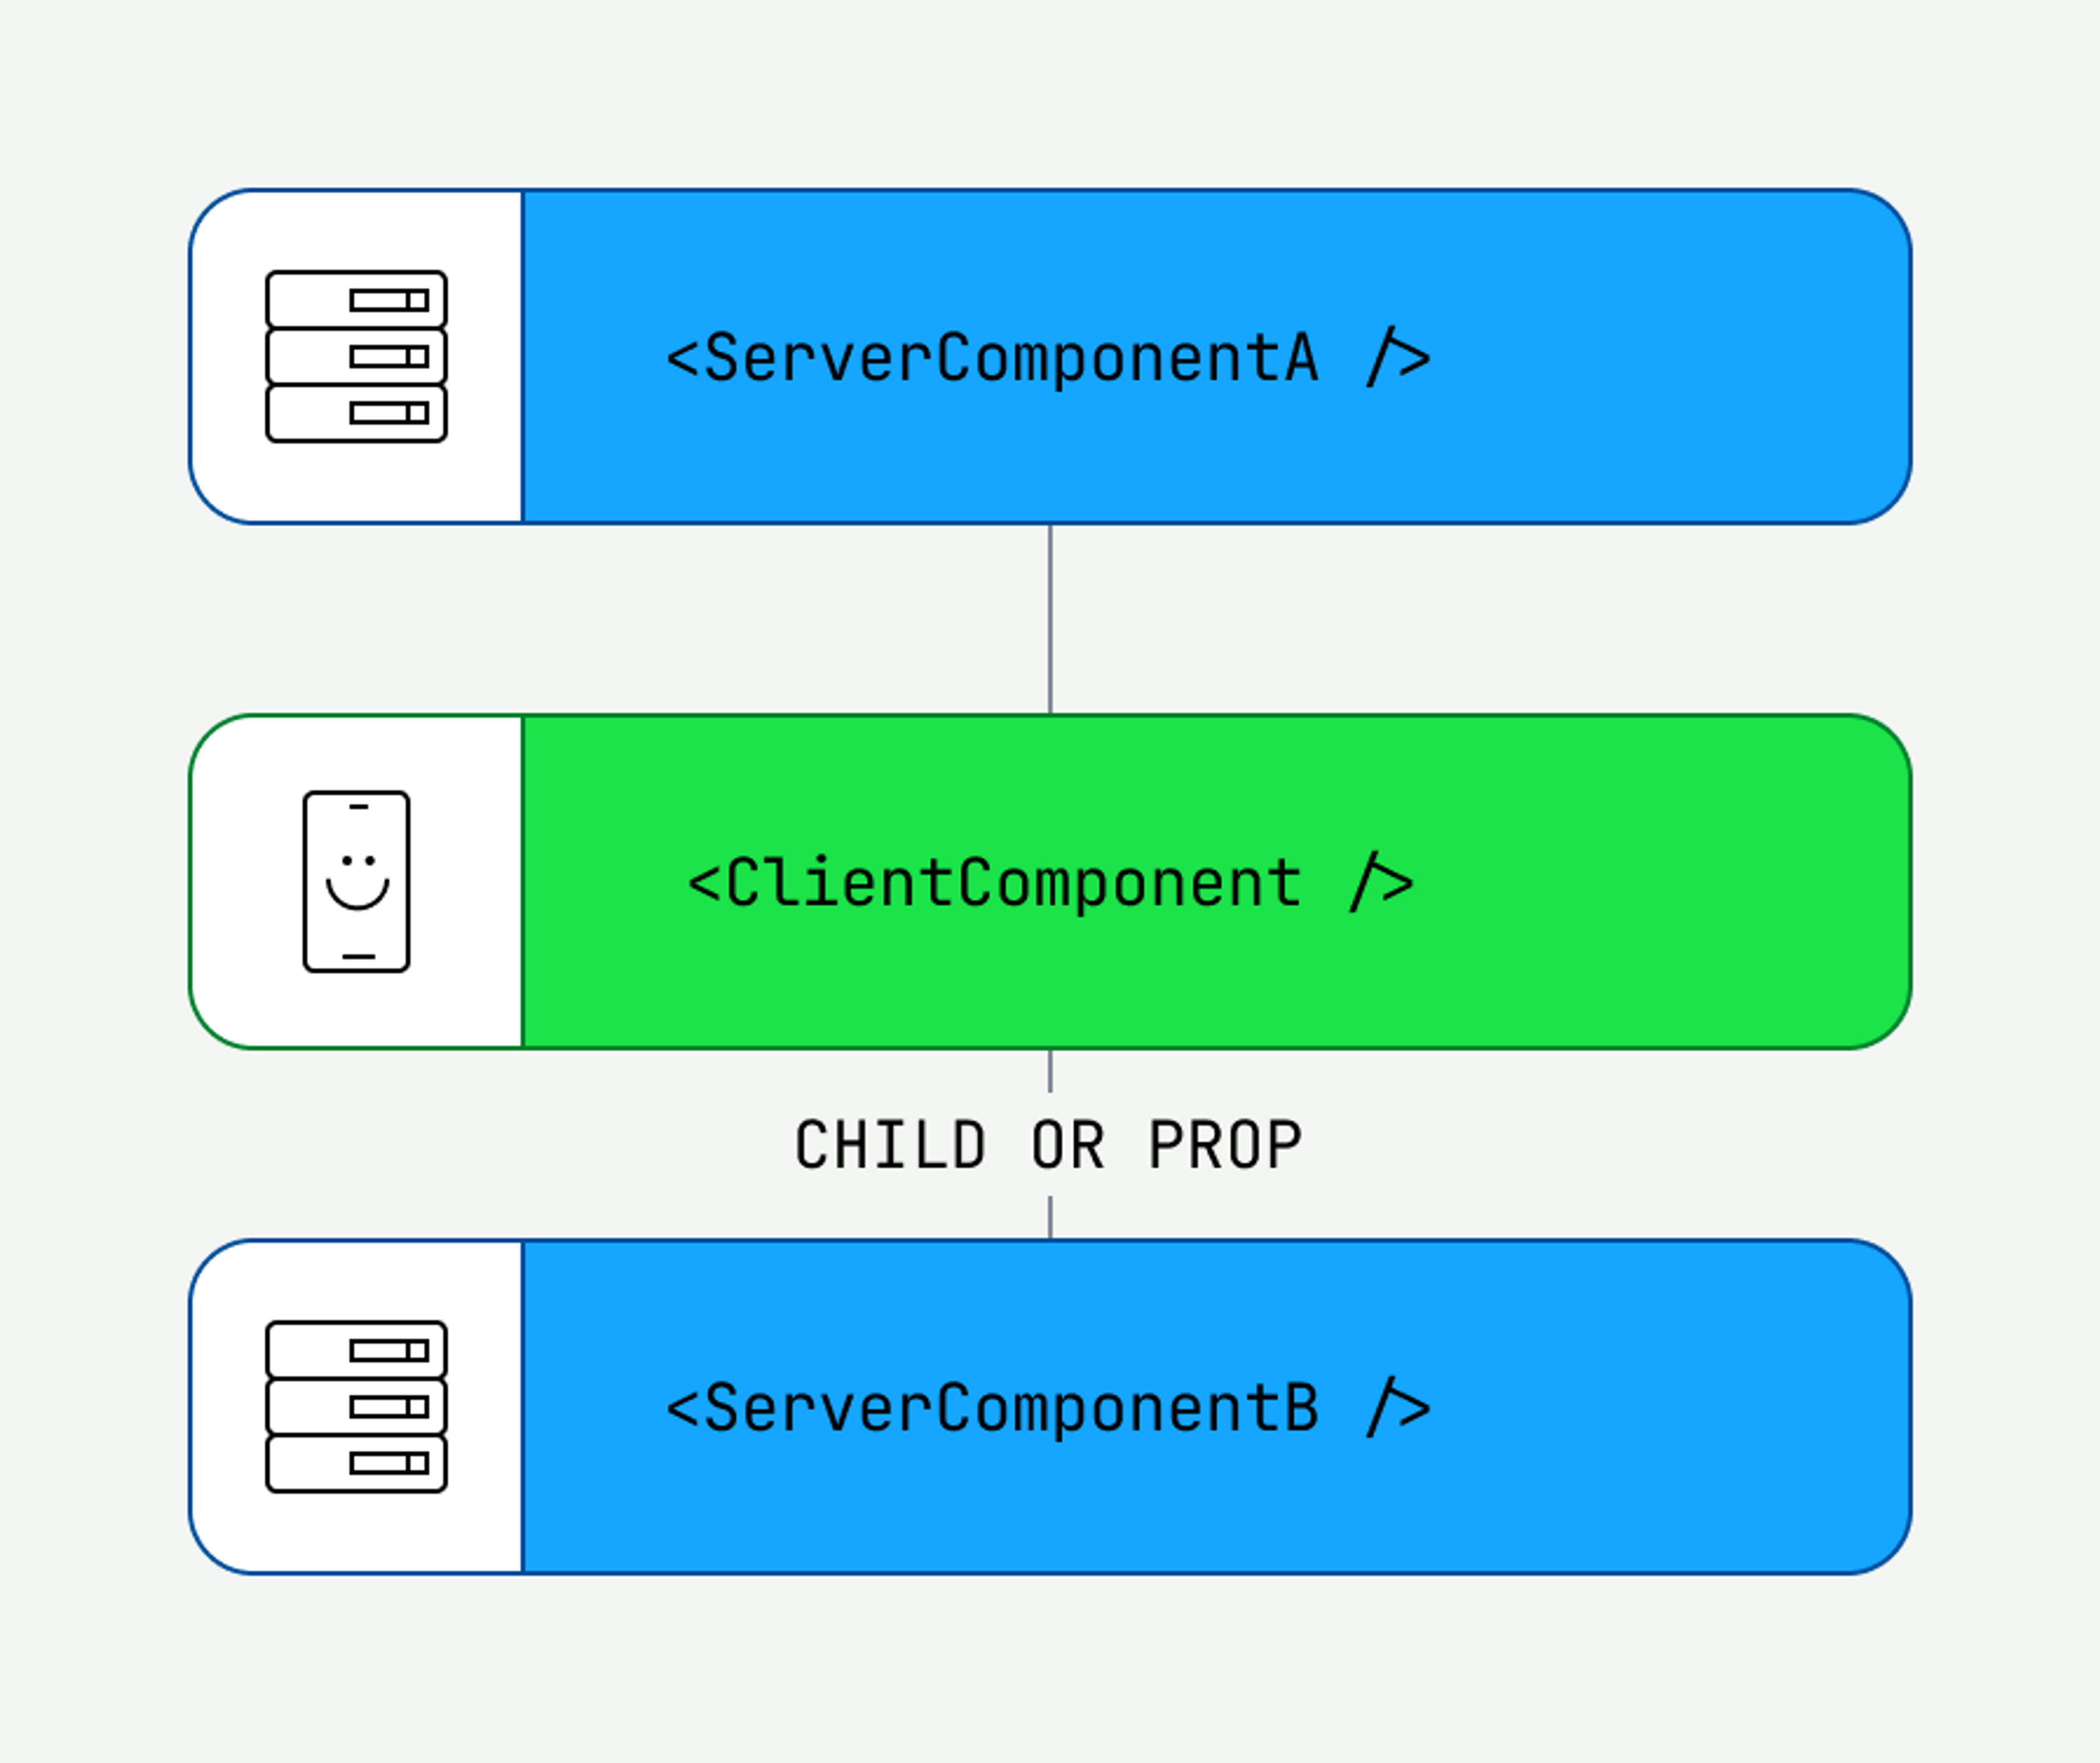 ServerComponentB remains a Server Component when ClientComponent receives it as a child or a prop, instead of importing it directly